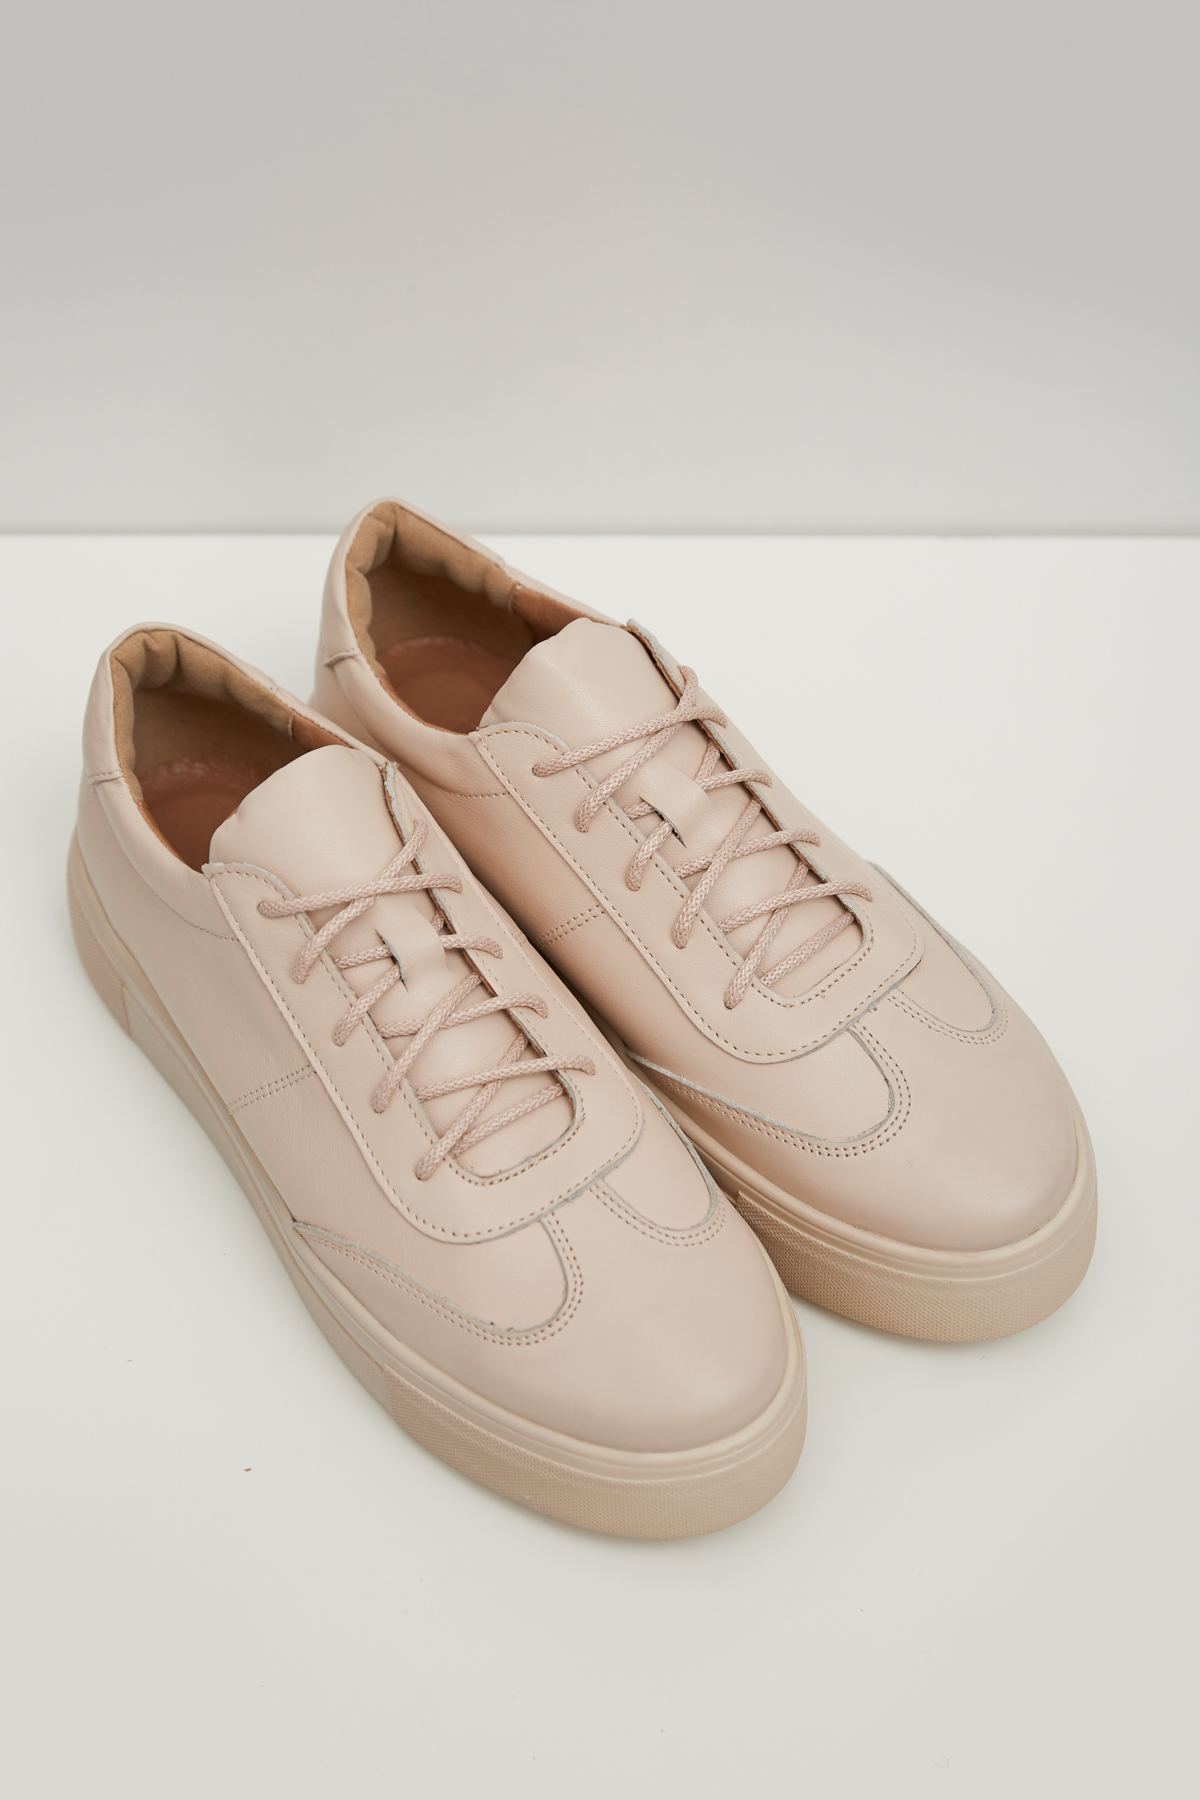 Beige leather sneakers with thick soles, photo 4